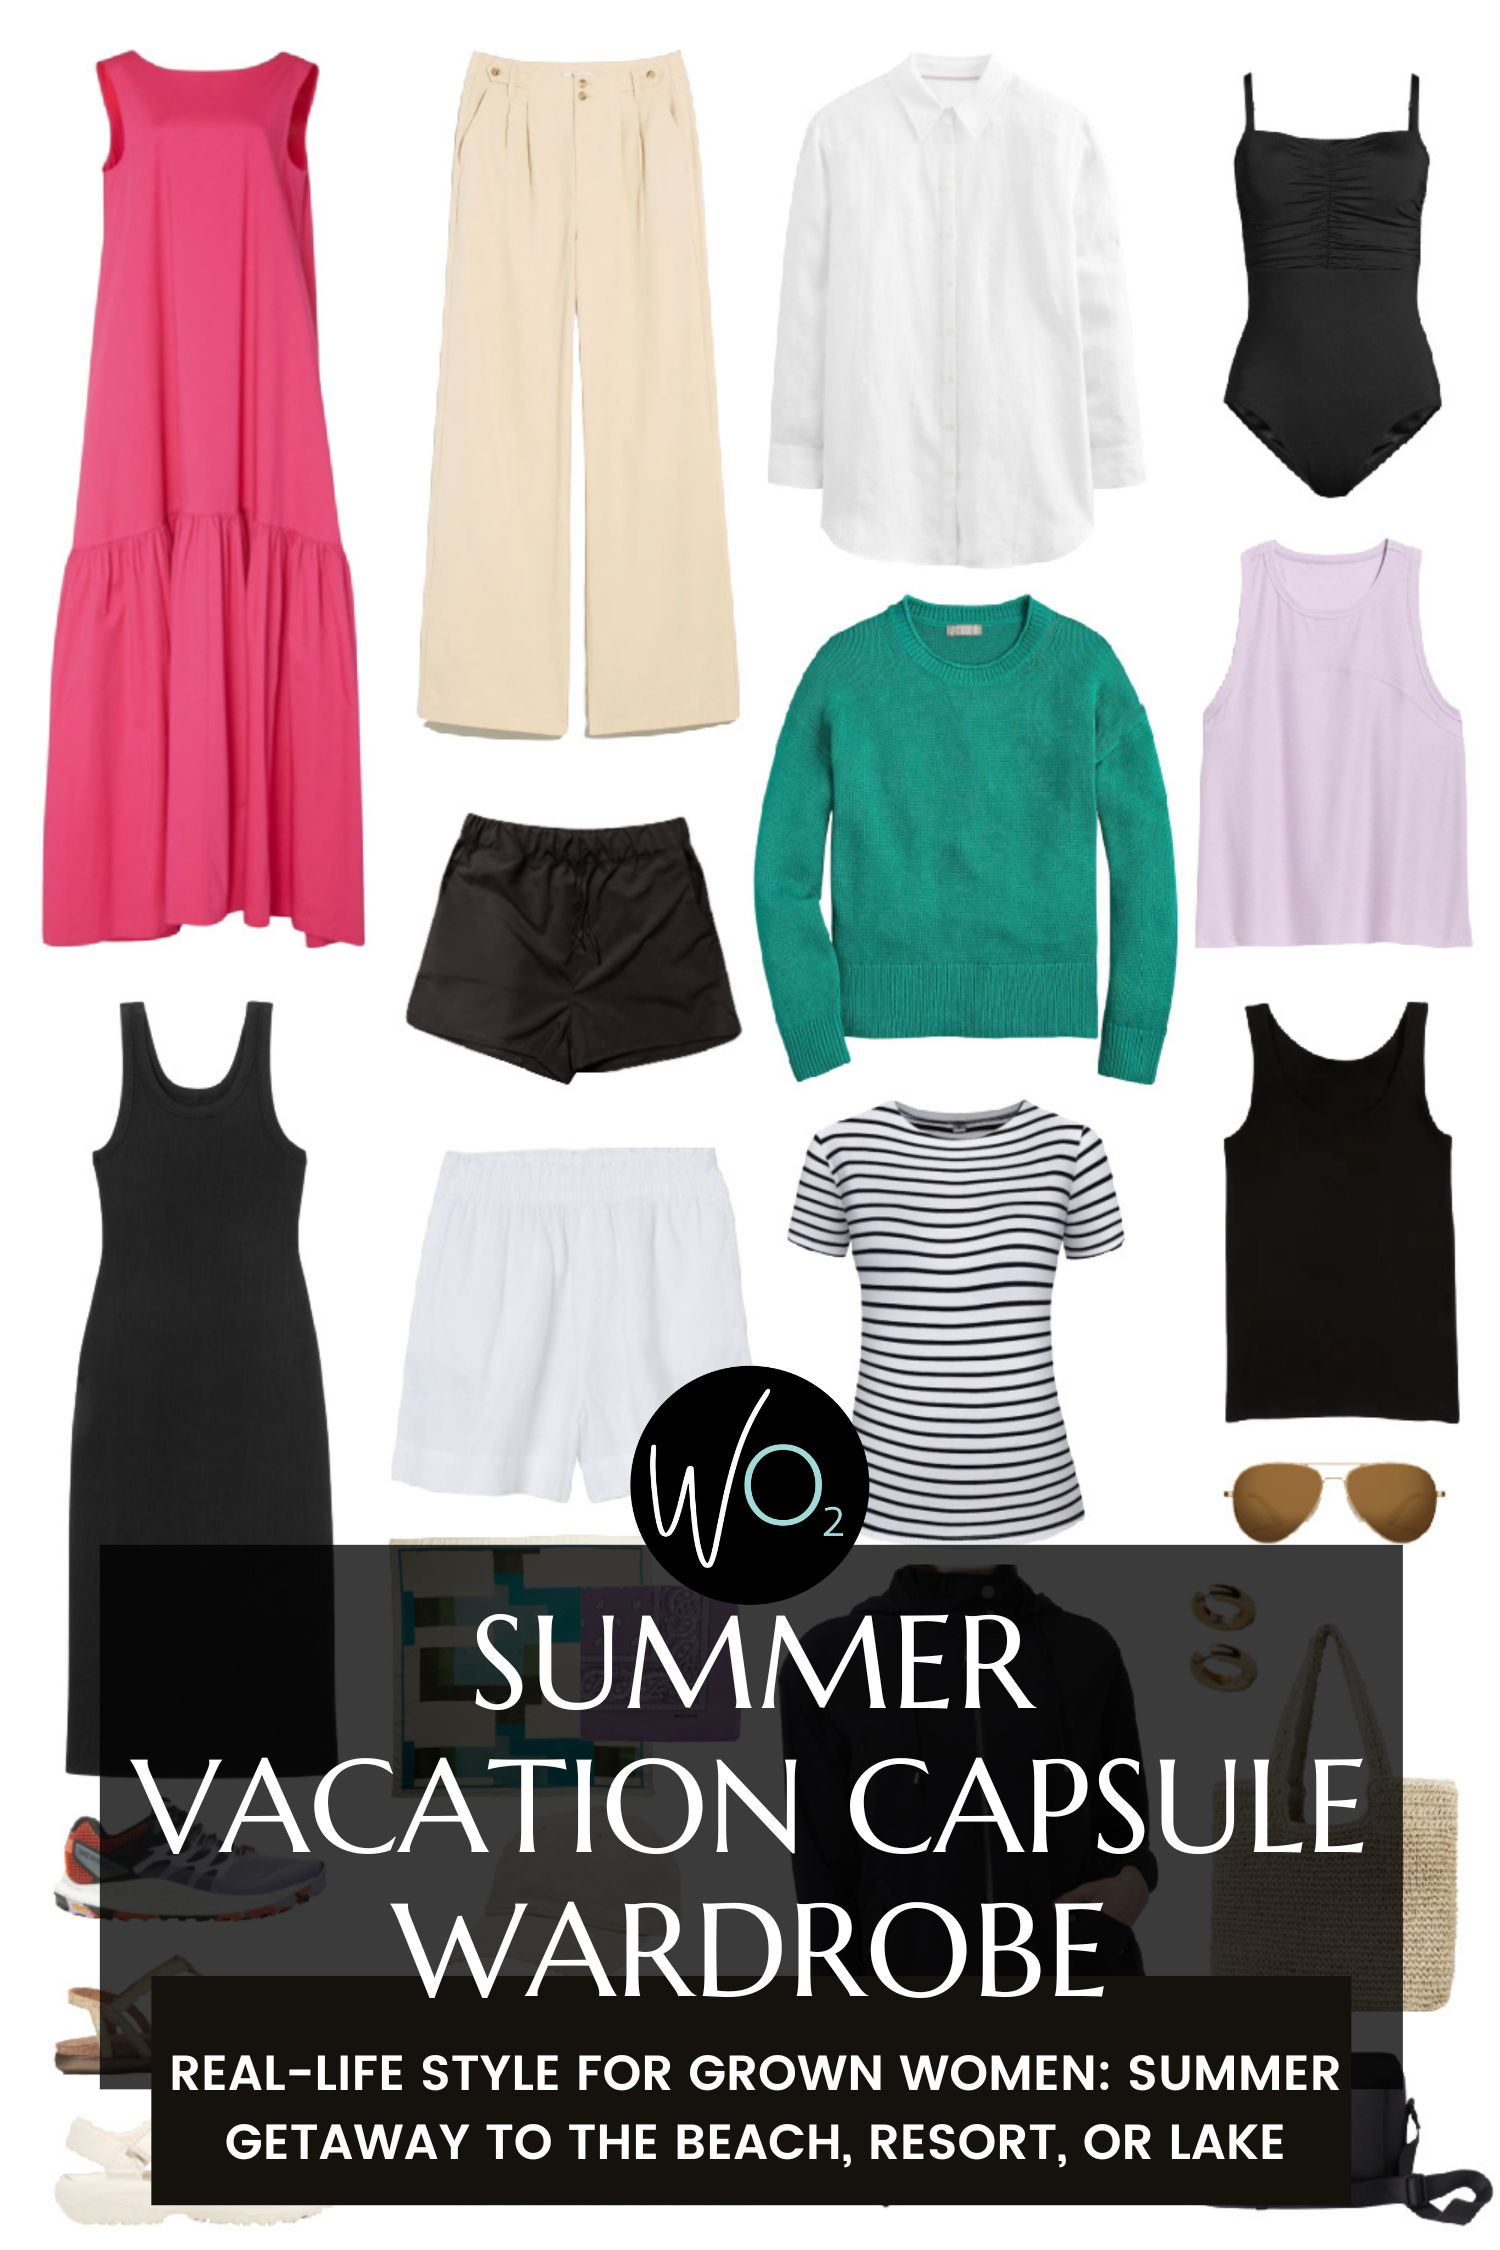 How To Build A Women's Capsule Wardrobe (Illustrated Guide)